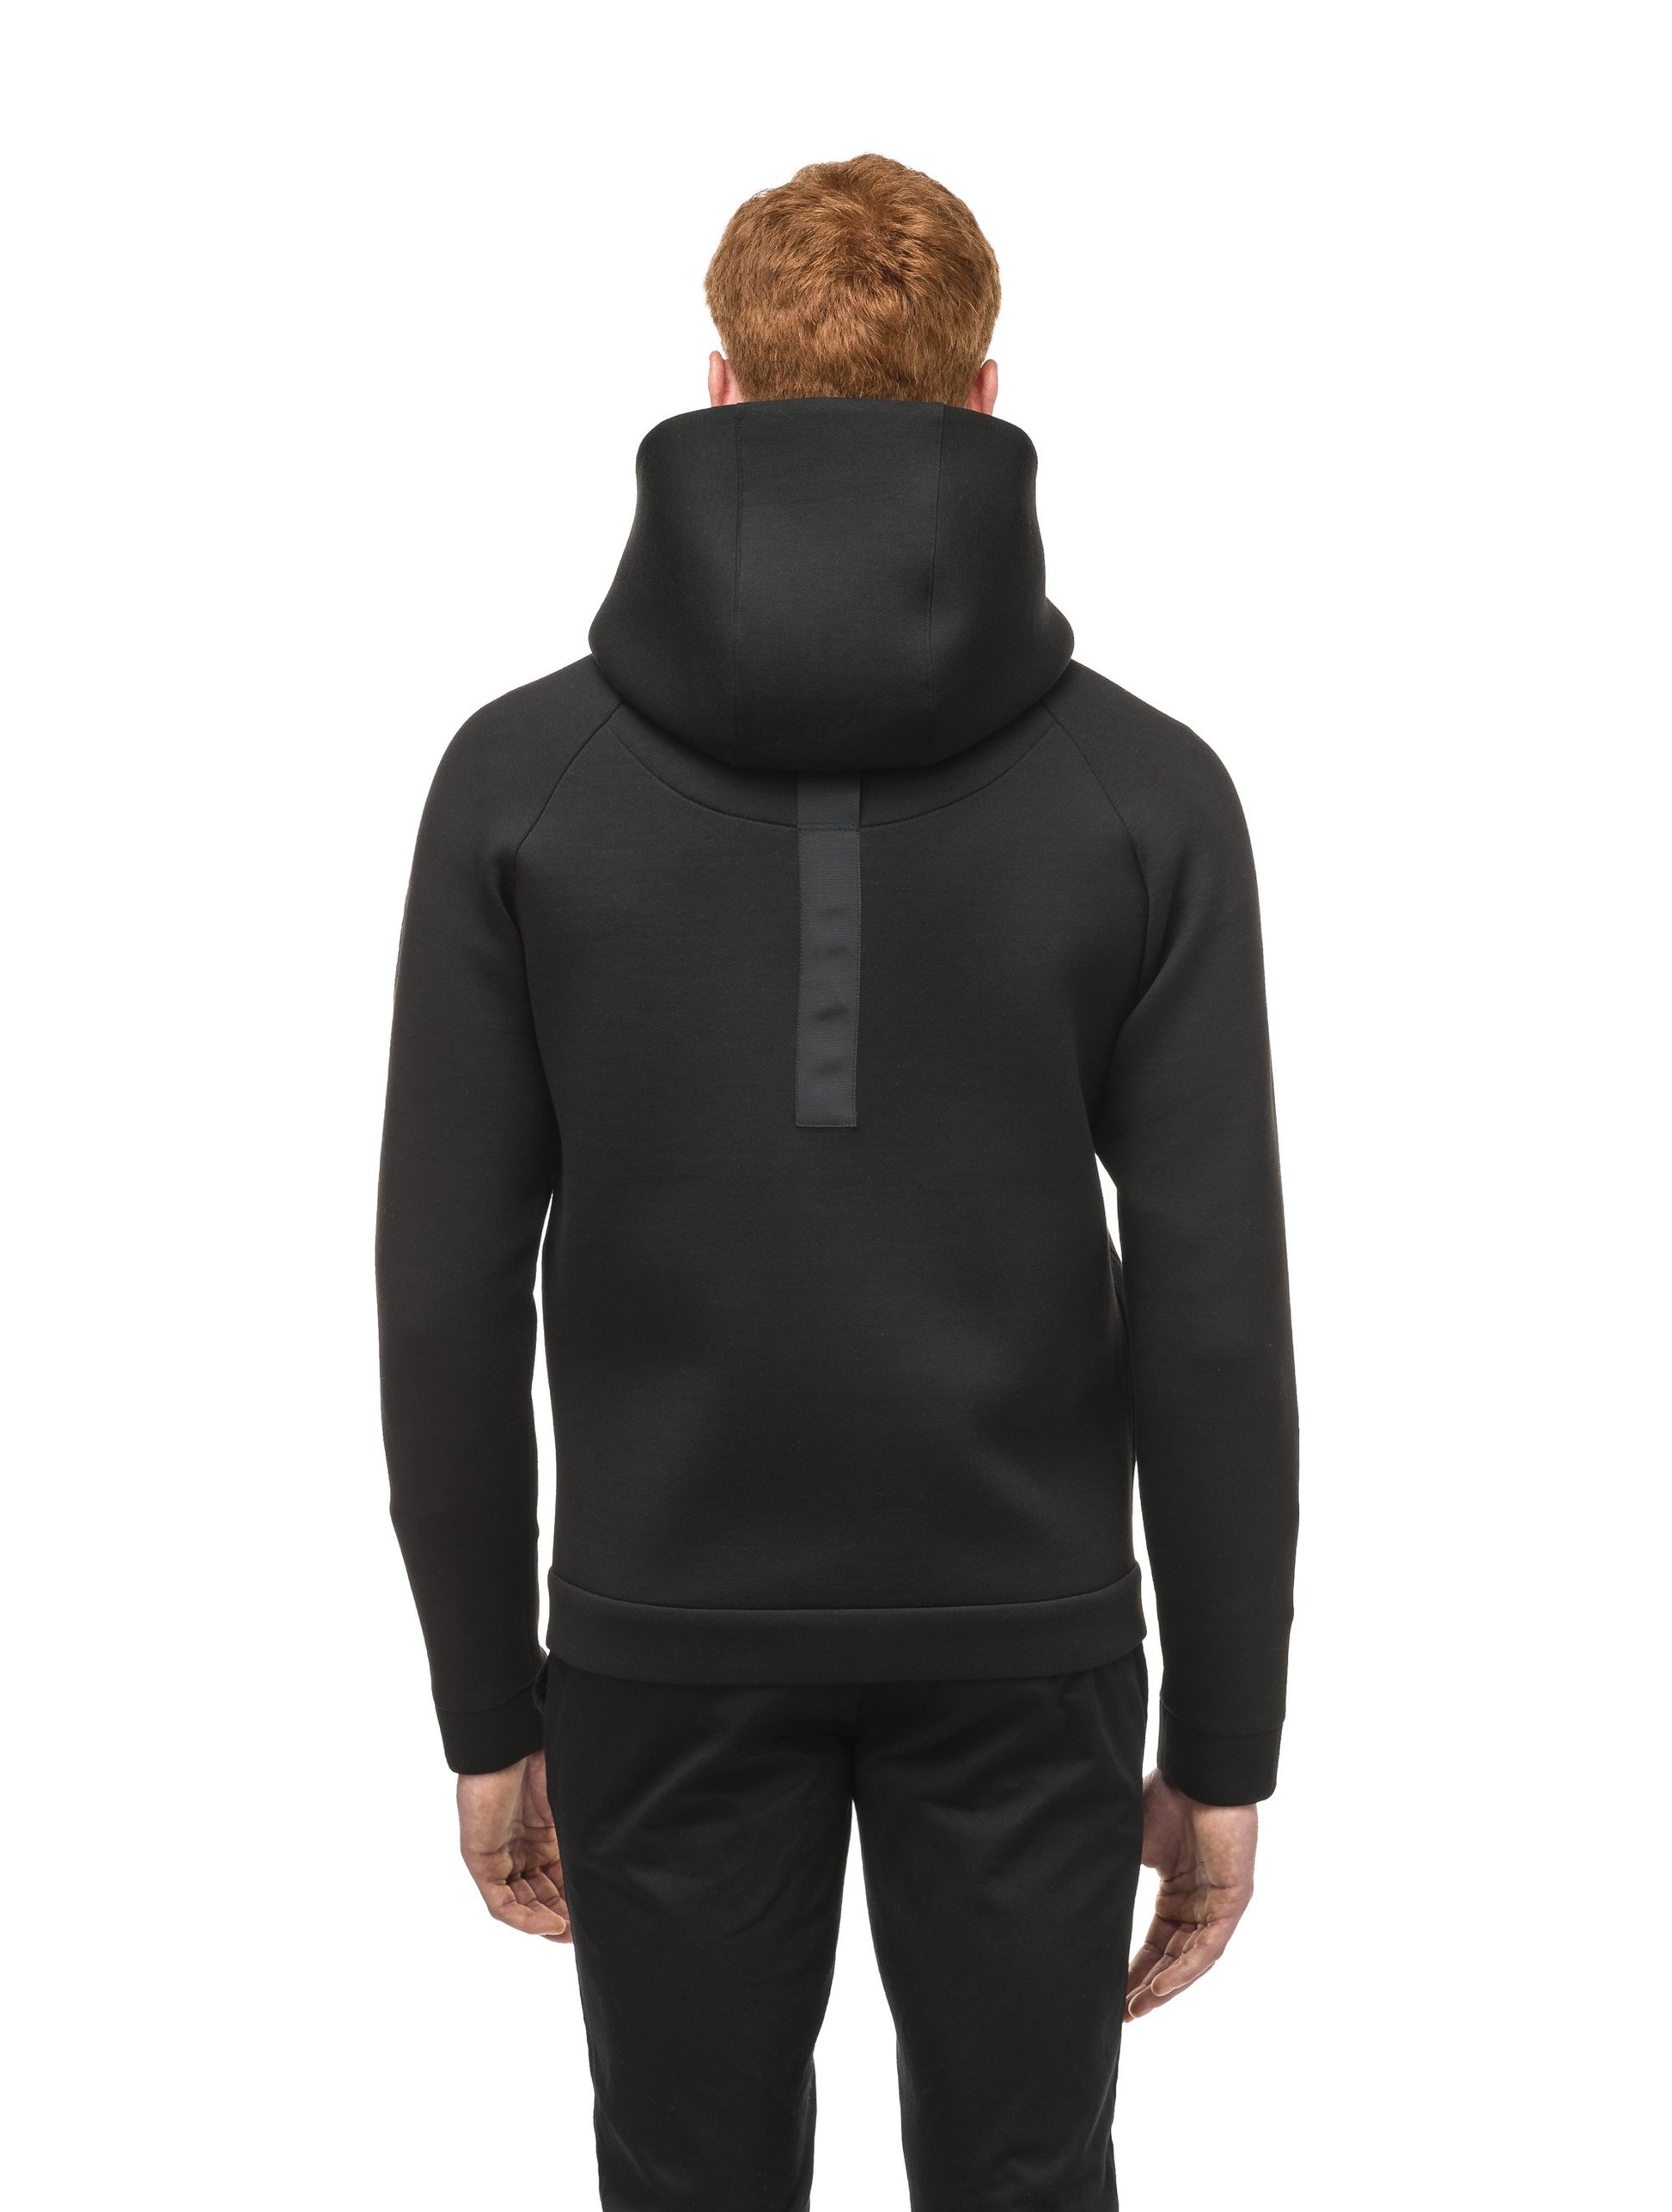 Men's premium rayon polyamide bonded jersey fabrication hoodie with exposed zipper in Black